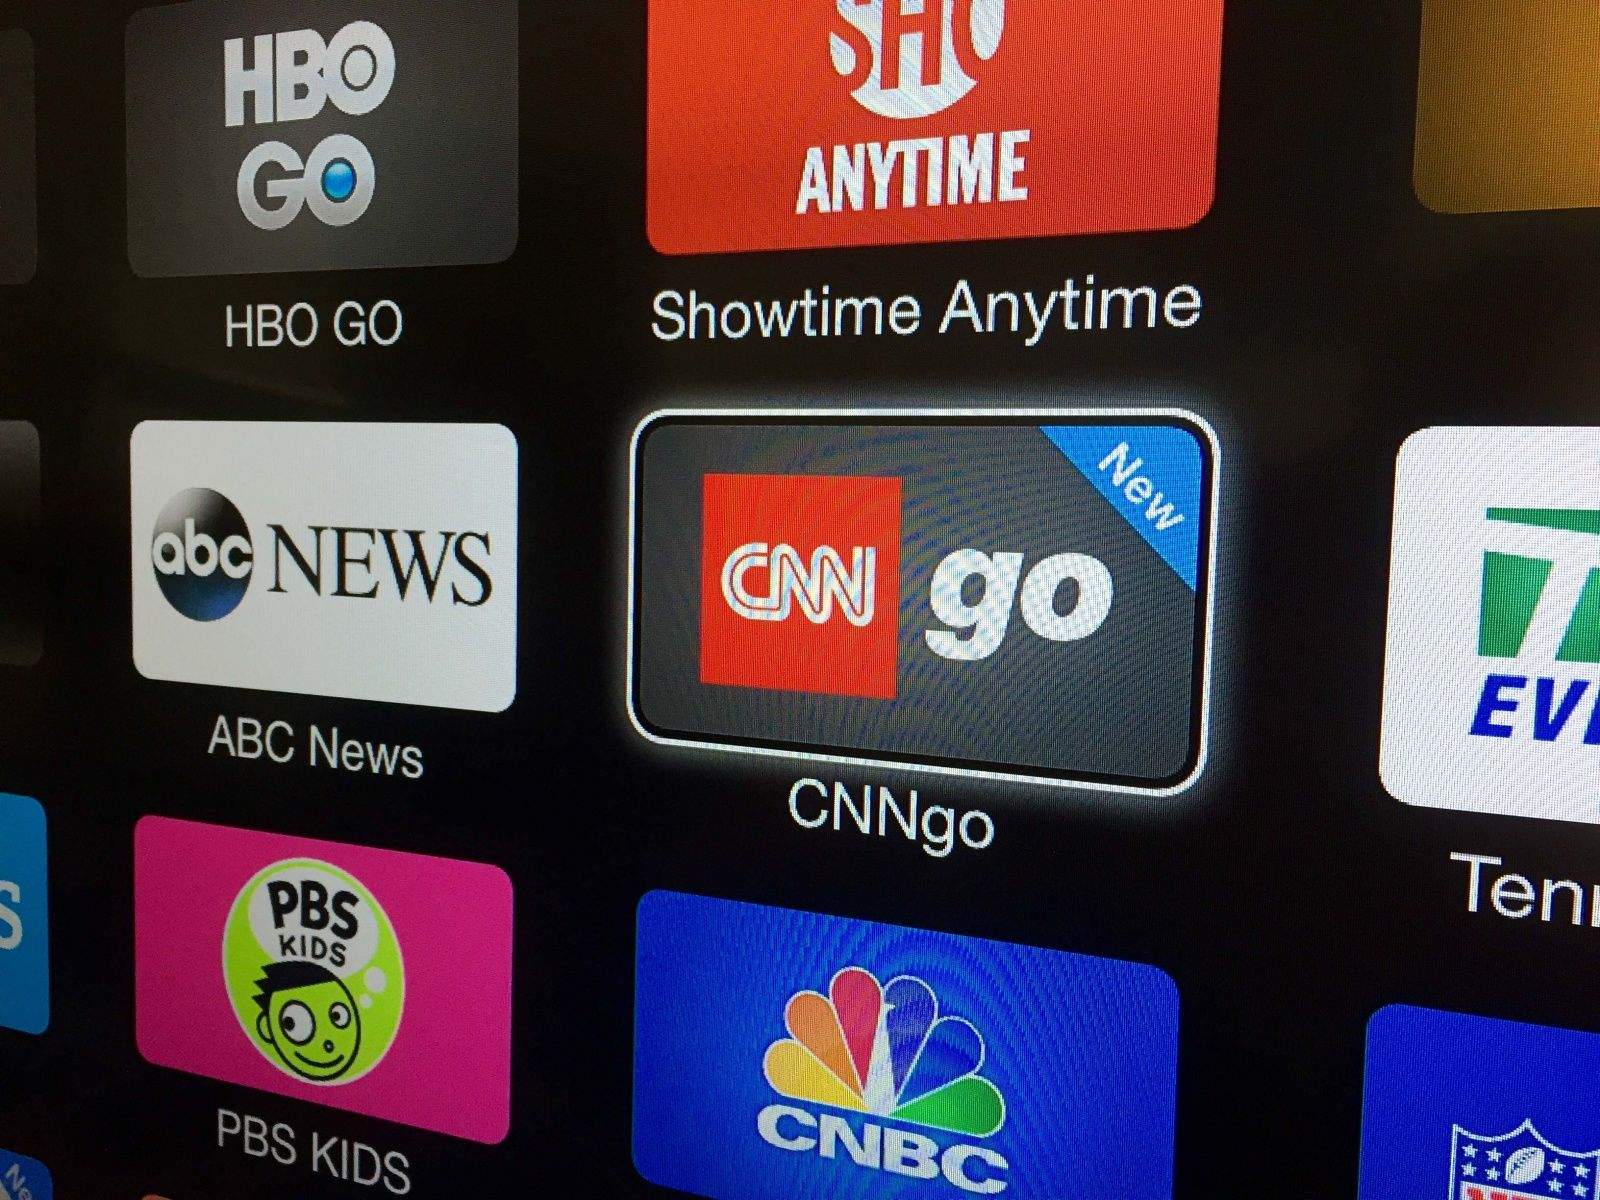 Apple's forthcoming service would unify top TV networks into one package. Photo: Alex Heath/ Cult of Mac